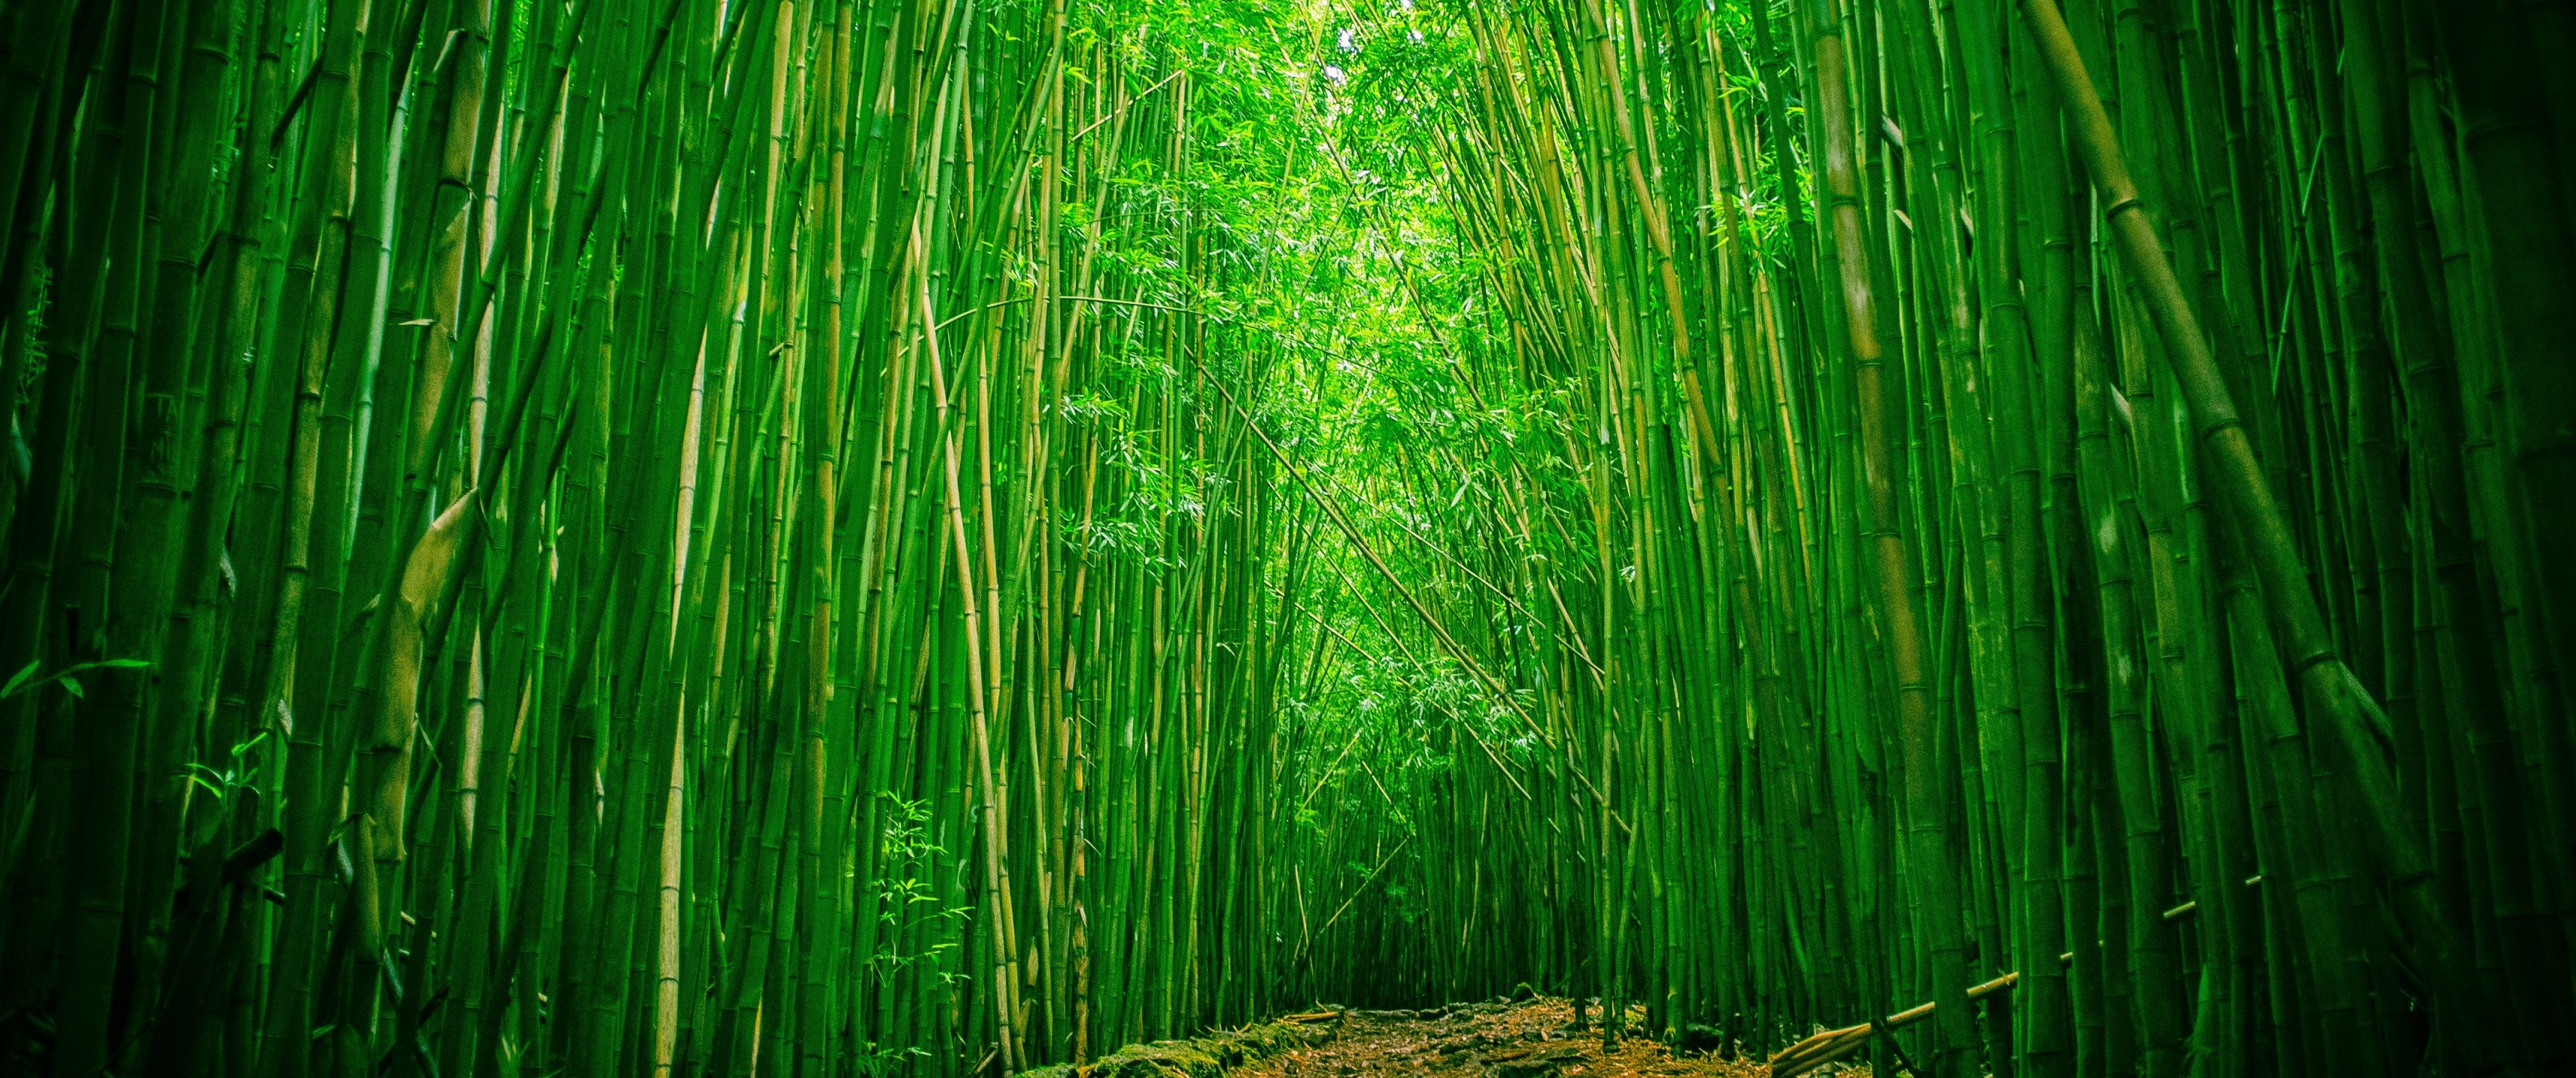 Download 3440x1440 Green Bamboo, Forest, Path Wallpaper